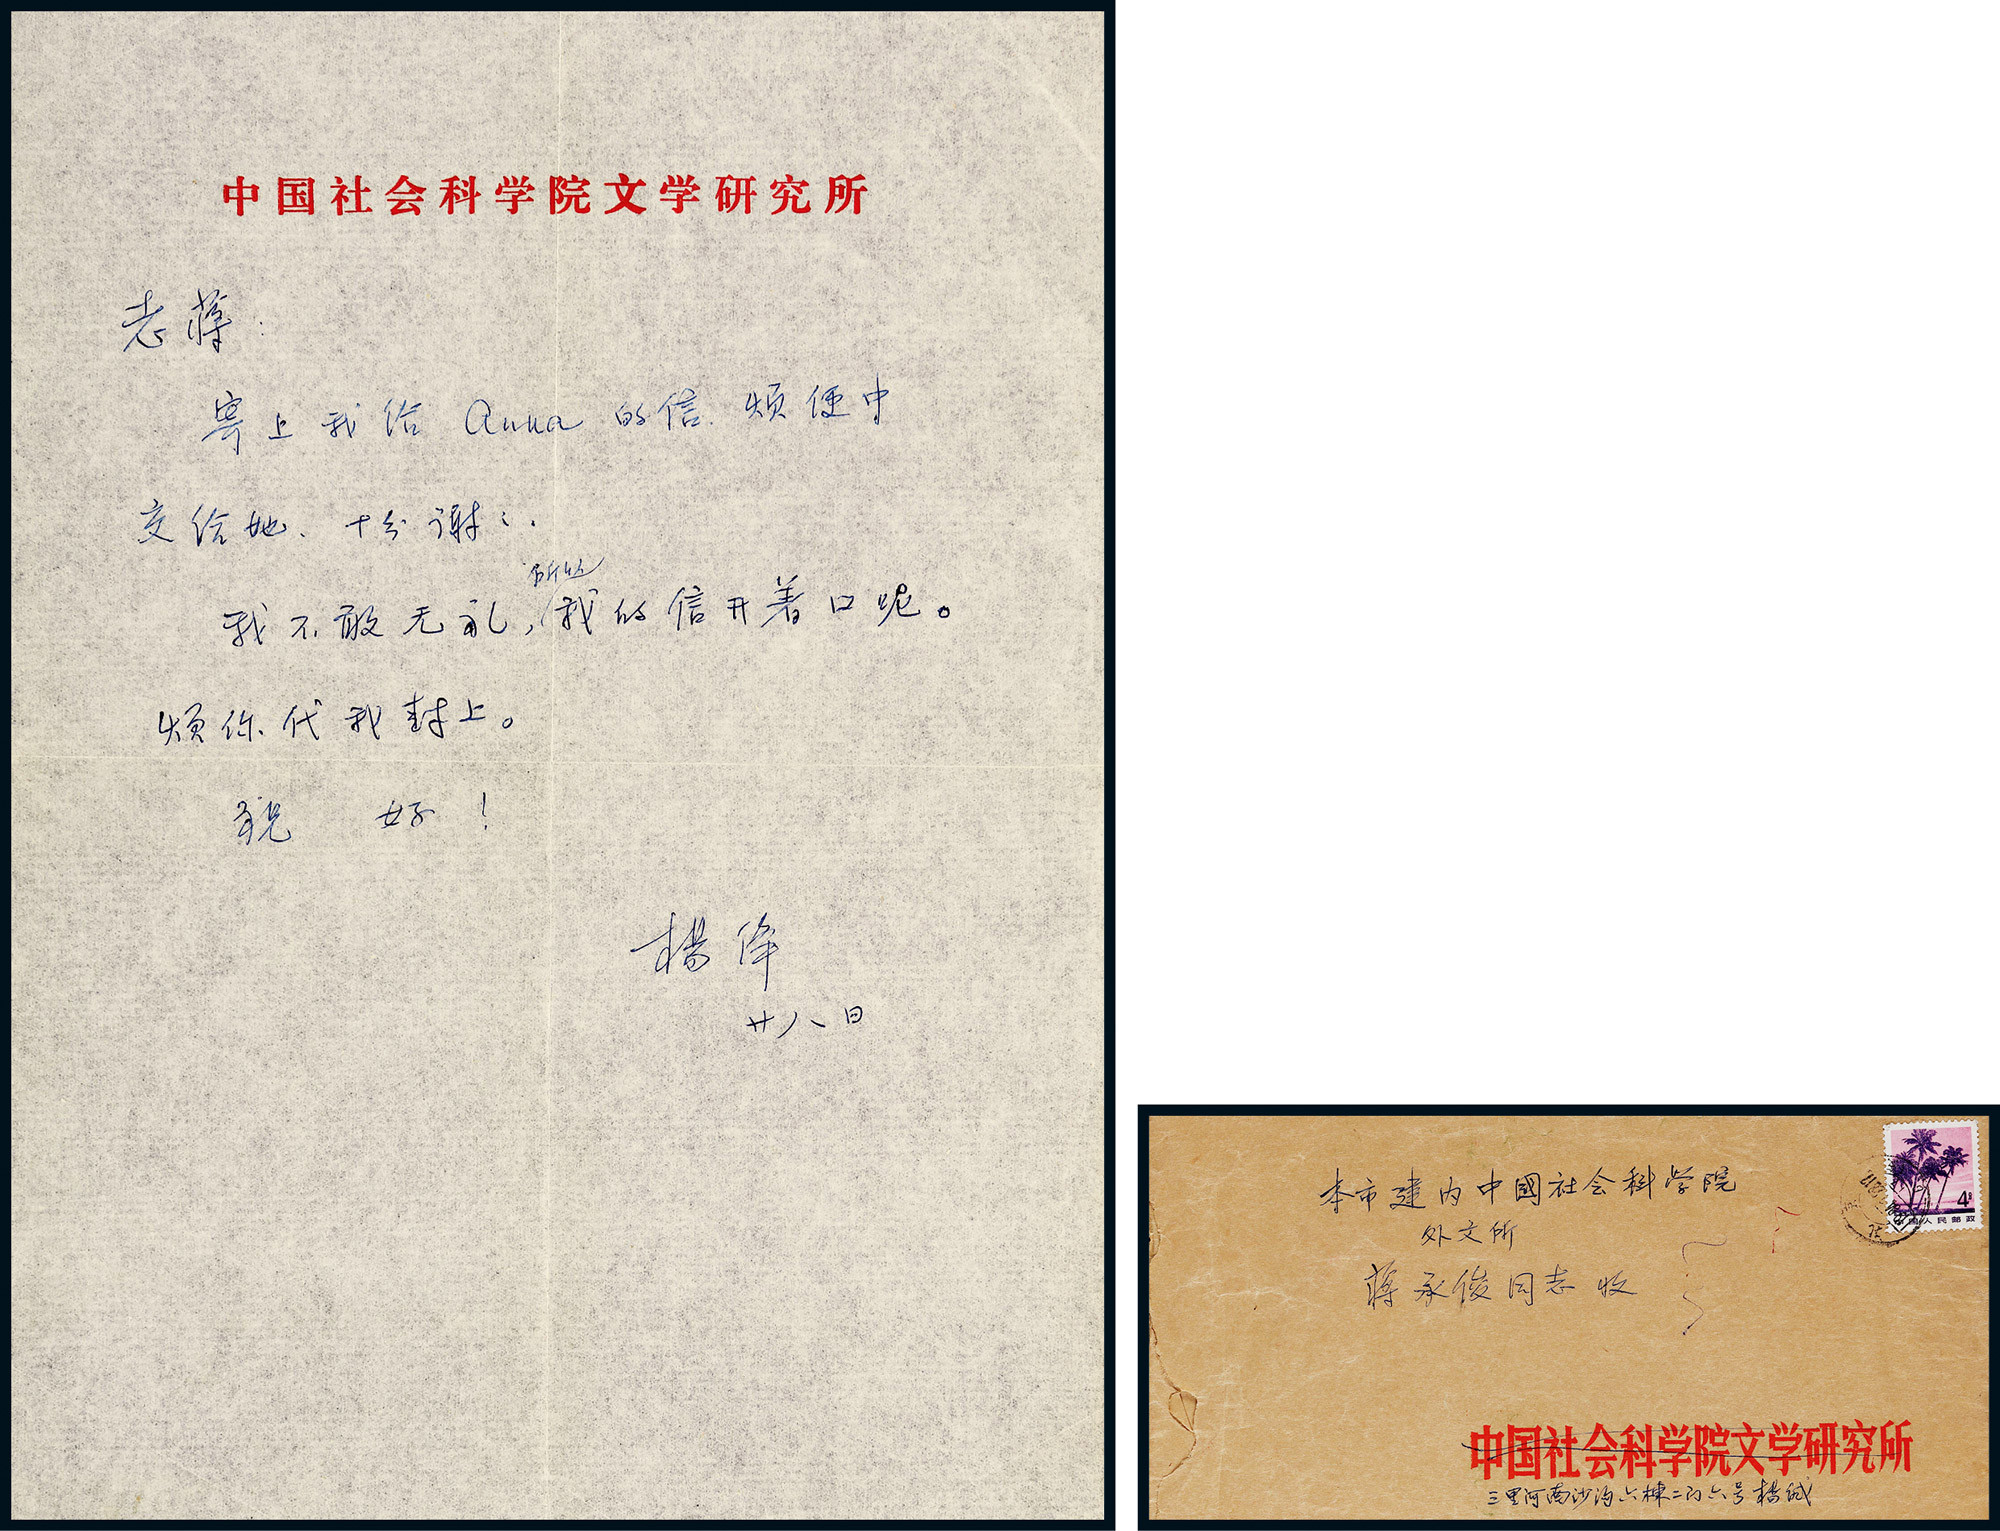 A letter from Yang Jiang with original envelope